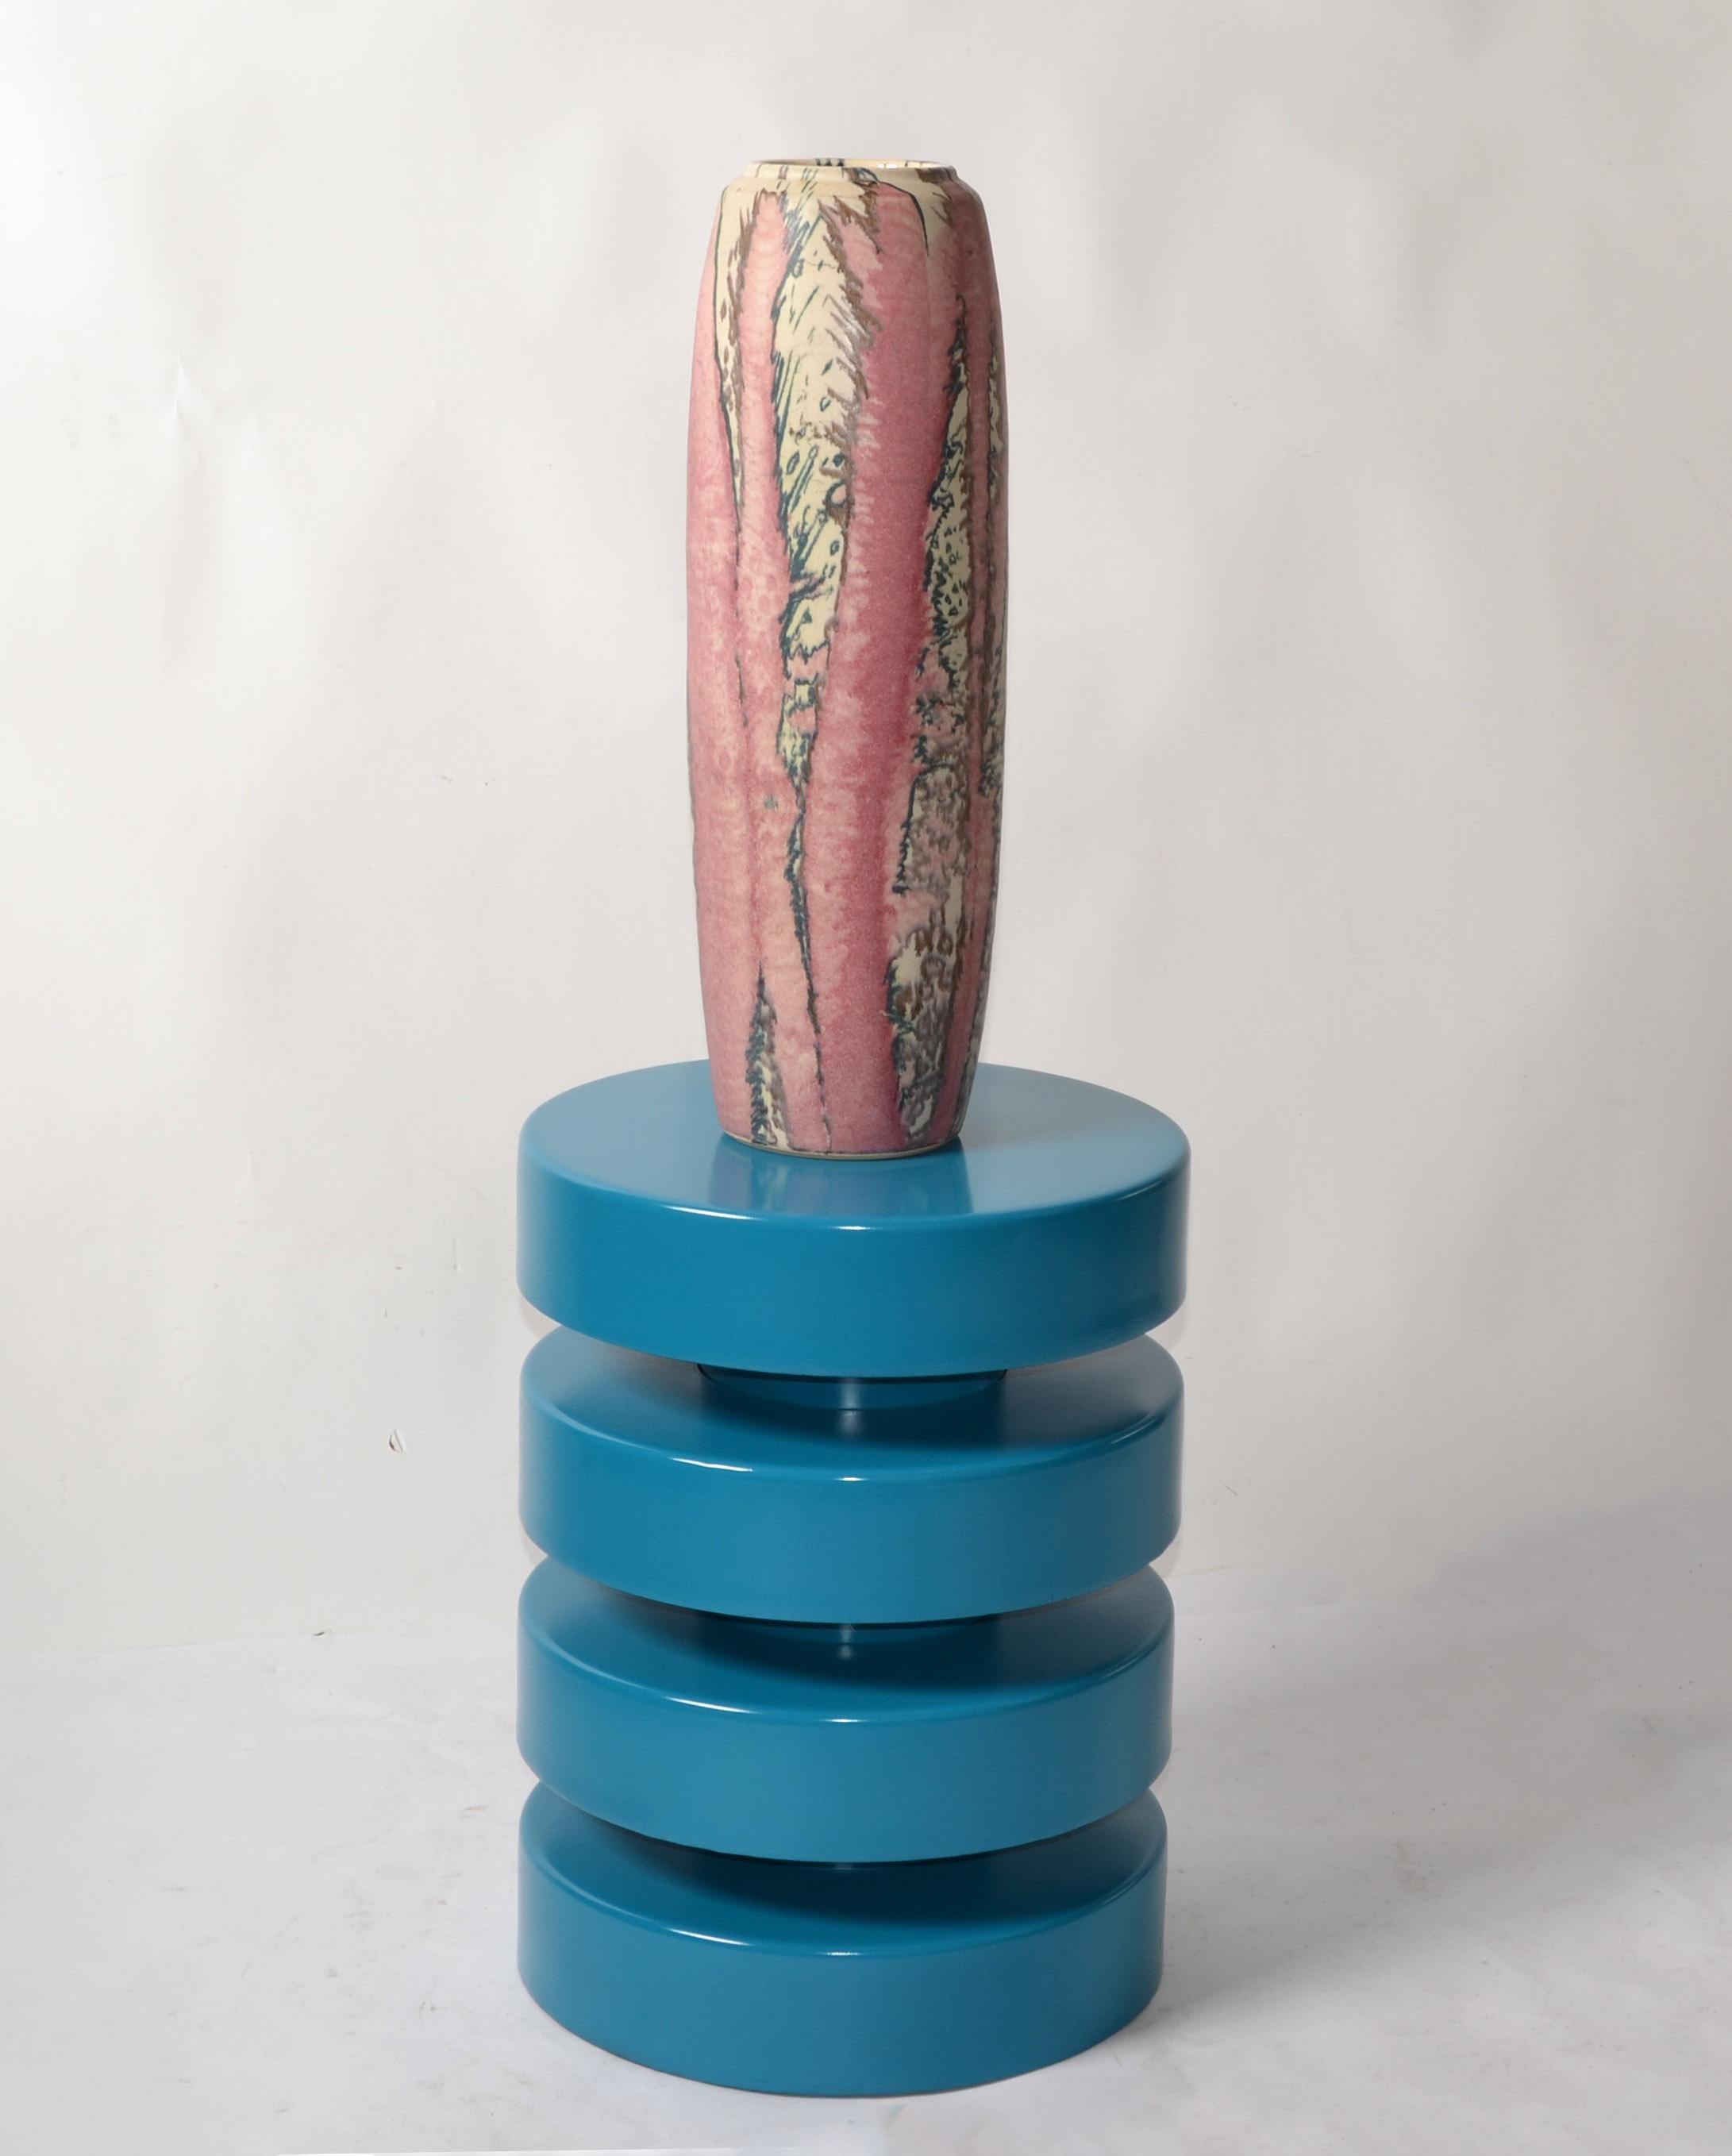 Signed Tall Incised Glazed Ceramic Studio Piece Pink Vase Mid-Century Modern 70s For Sale 4